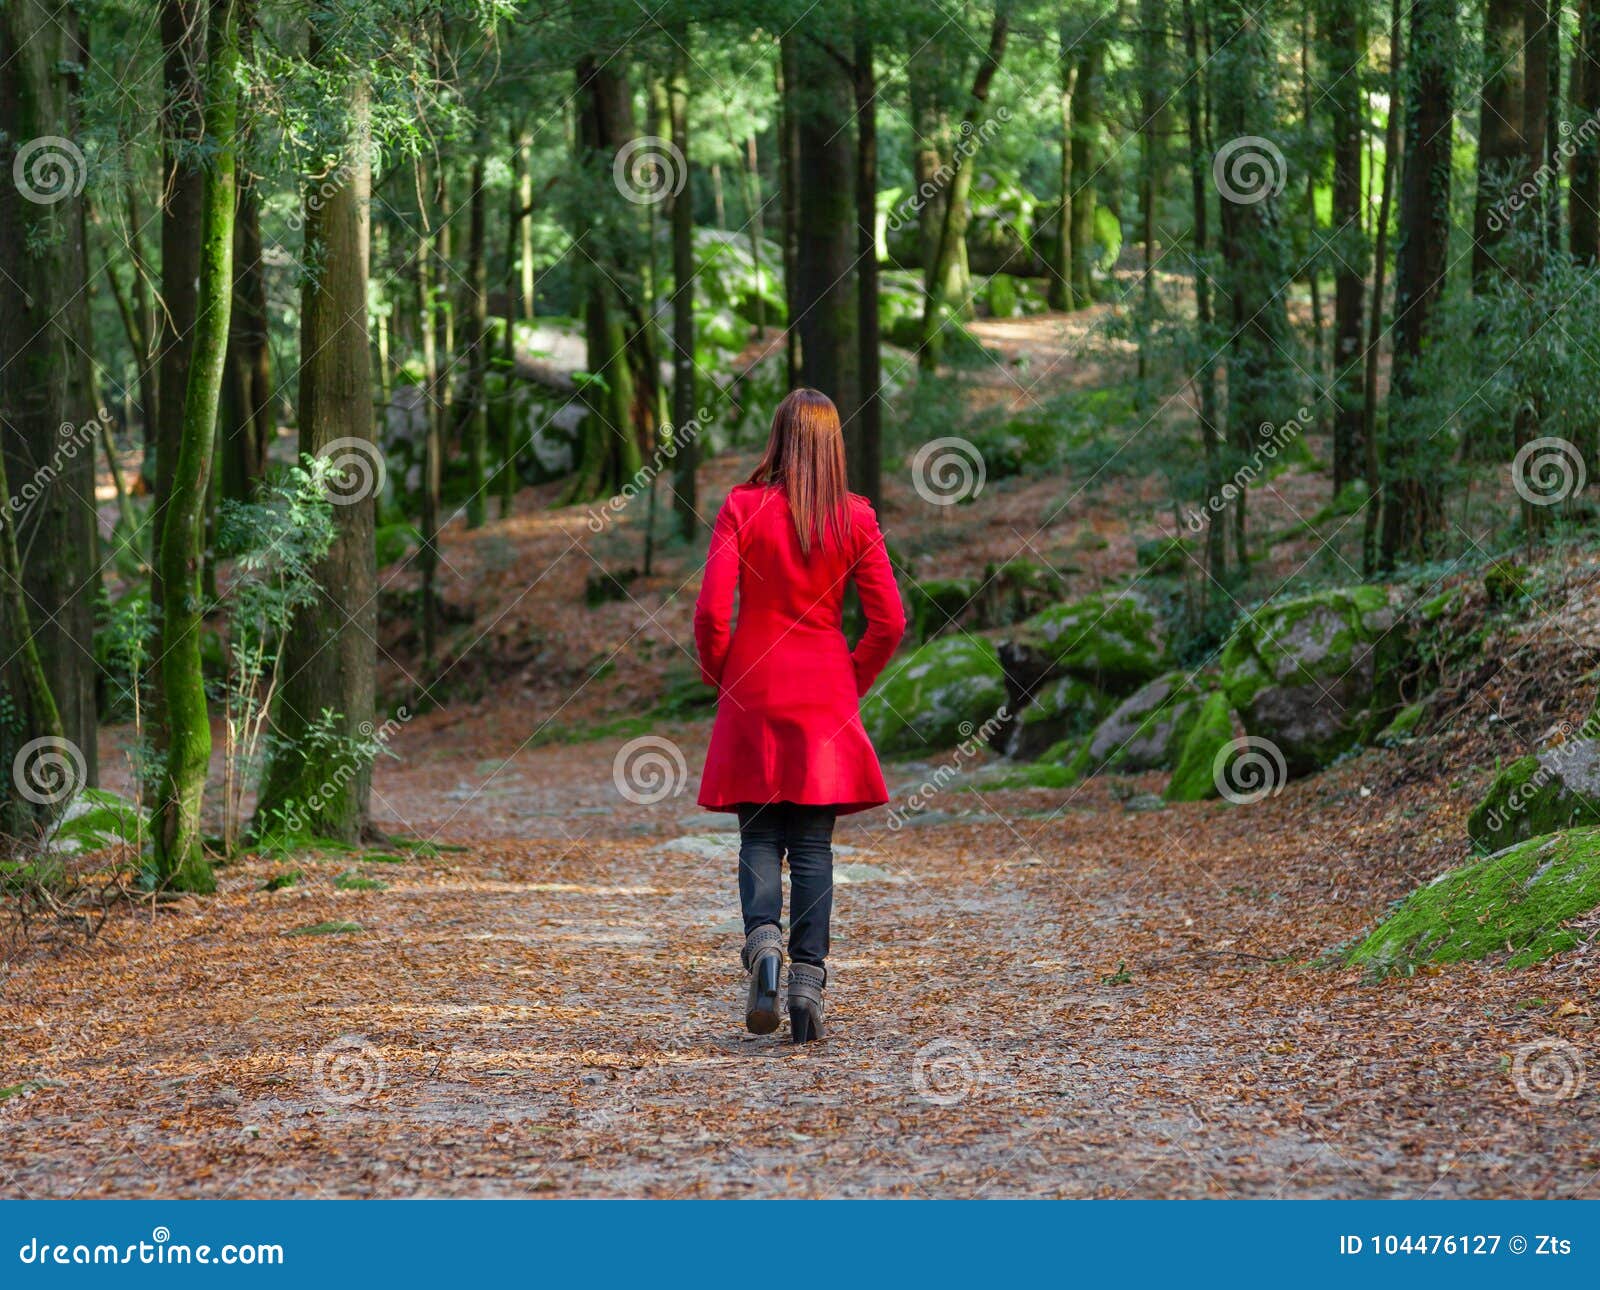 young woman walking away alone on forest path wearing red long coat